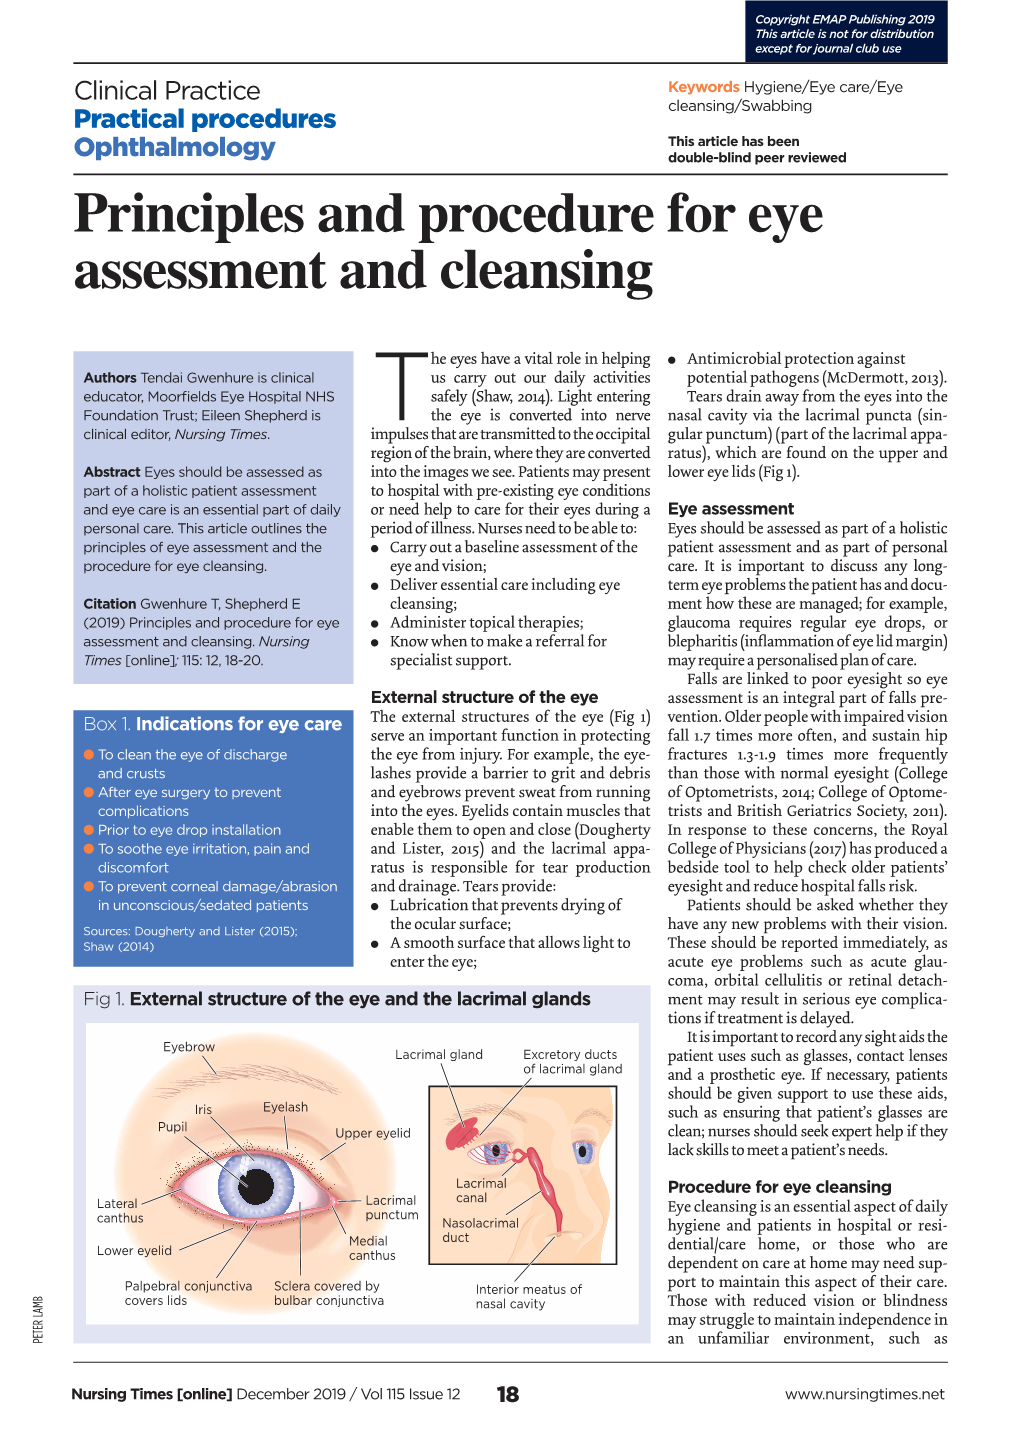 Principles and Procedure for Eye Assessment and Cleansing